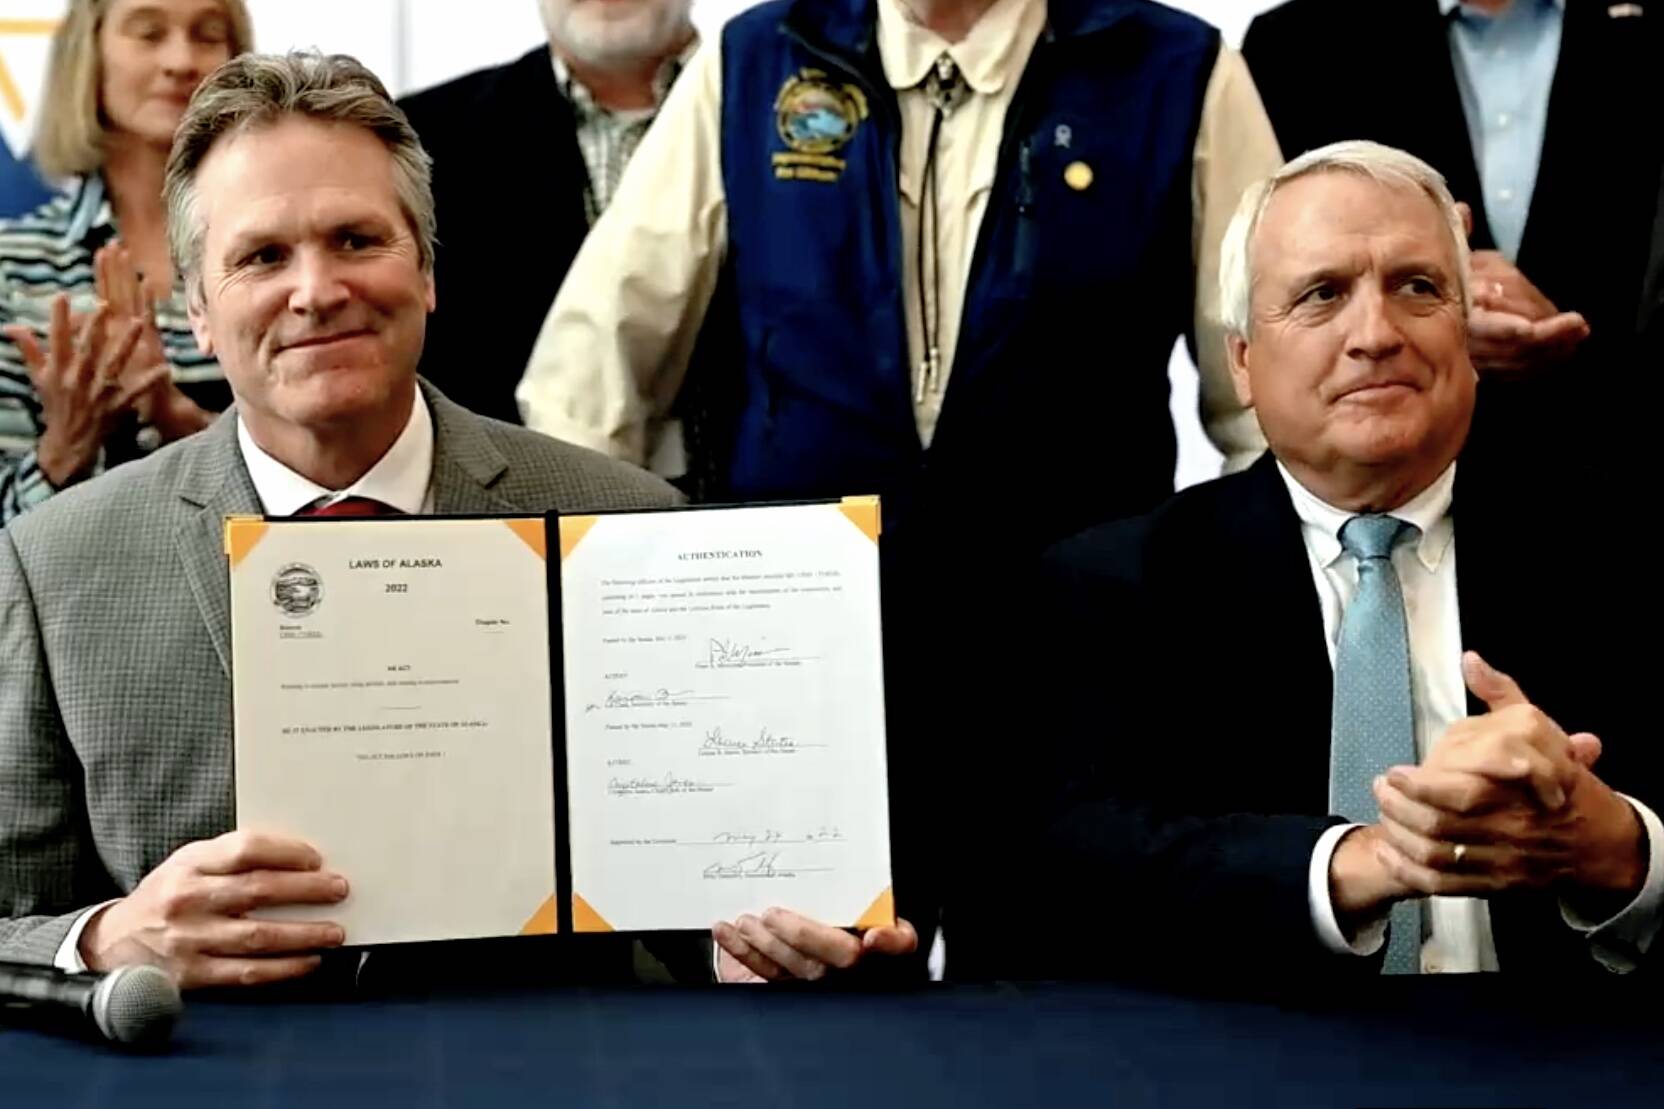 Alaska Gov. Mike Dunleavy, left, holds up a copy of Senate Bill 177, easing regulations for nuclear microreactors, with former Colorado Gov. Bill Ritter at the first Alaska Sustainable Energy Conference at the Dena’ina Civic and Convention Center in Anchorage on Tuesday, May 24, 2022. (Screenshot)